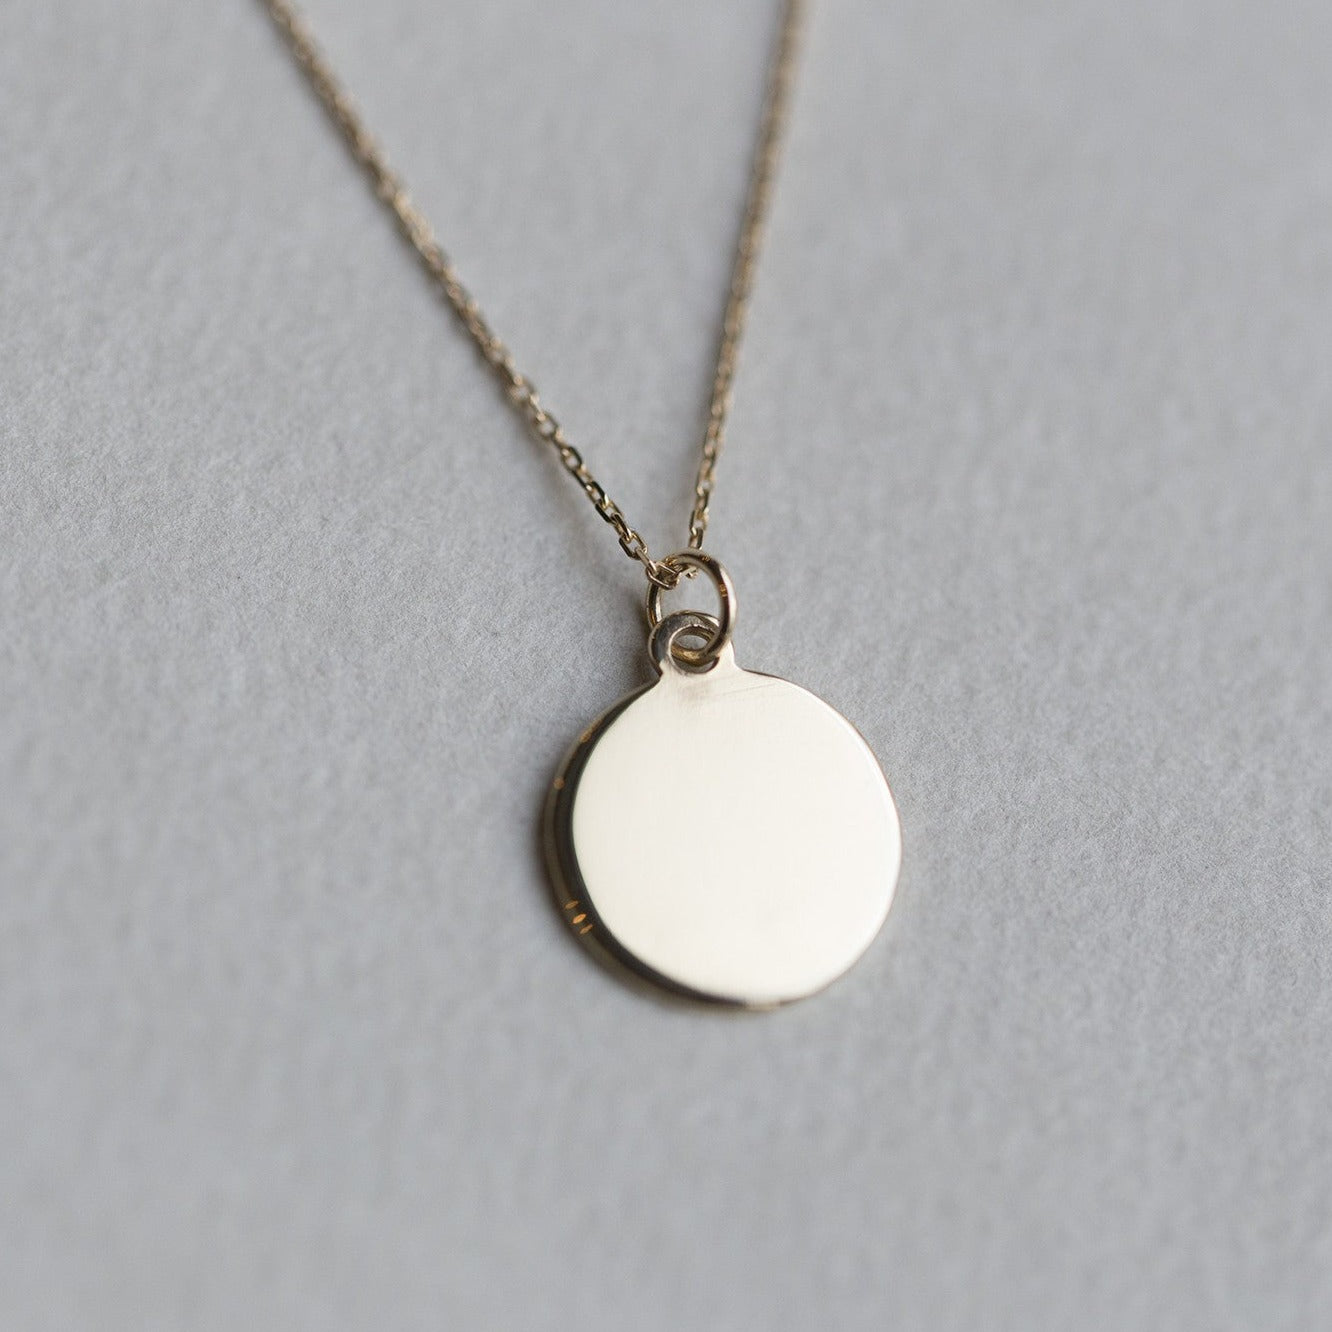 felt's own design - incredibly simple and enchanting polished gold disc 